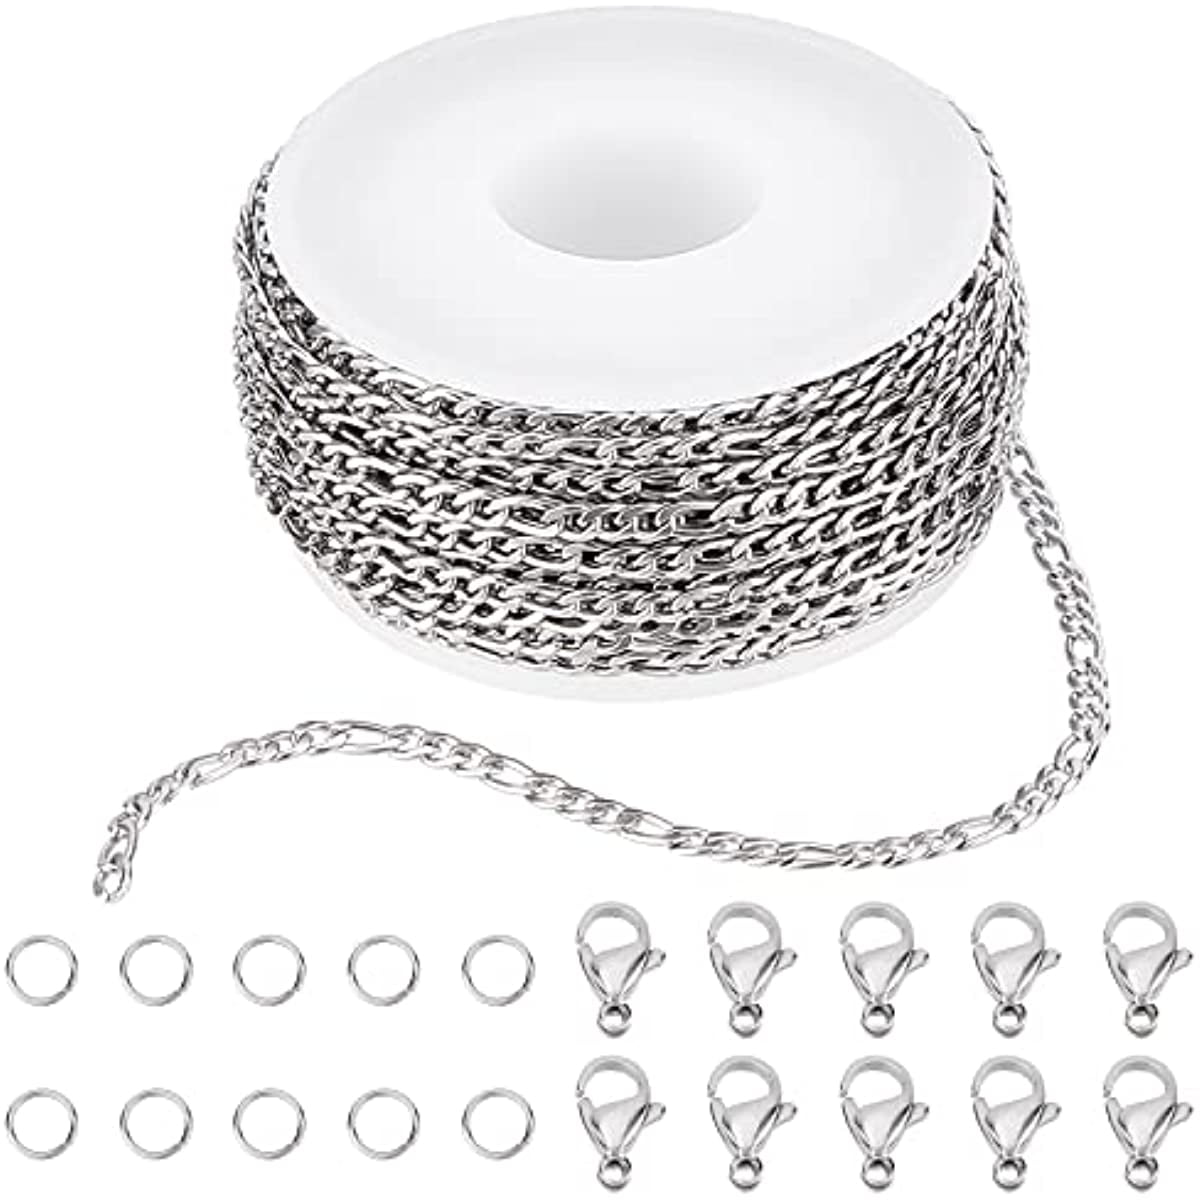 DIY 10M 32.8 Feet 3MM Silver Chain Roll Figaro Chains Silver Plated  Necklace Stainless Steel Cable Long Craft Link Chain Bulk for Jewelry  Making Kits